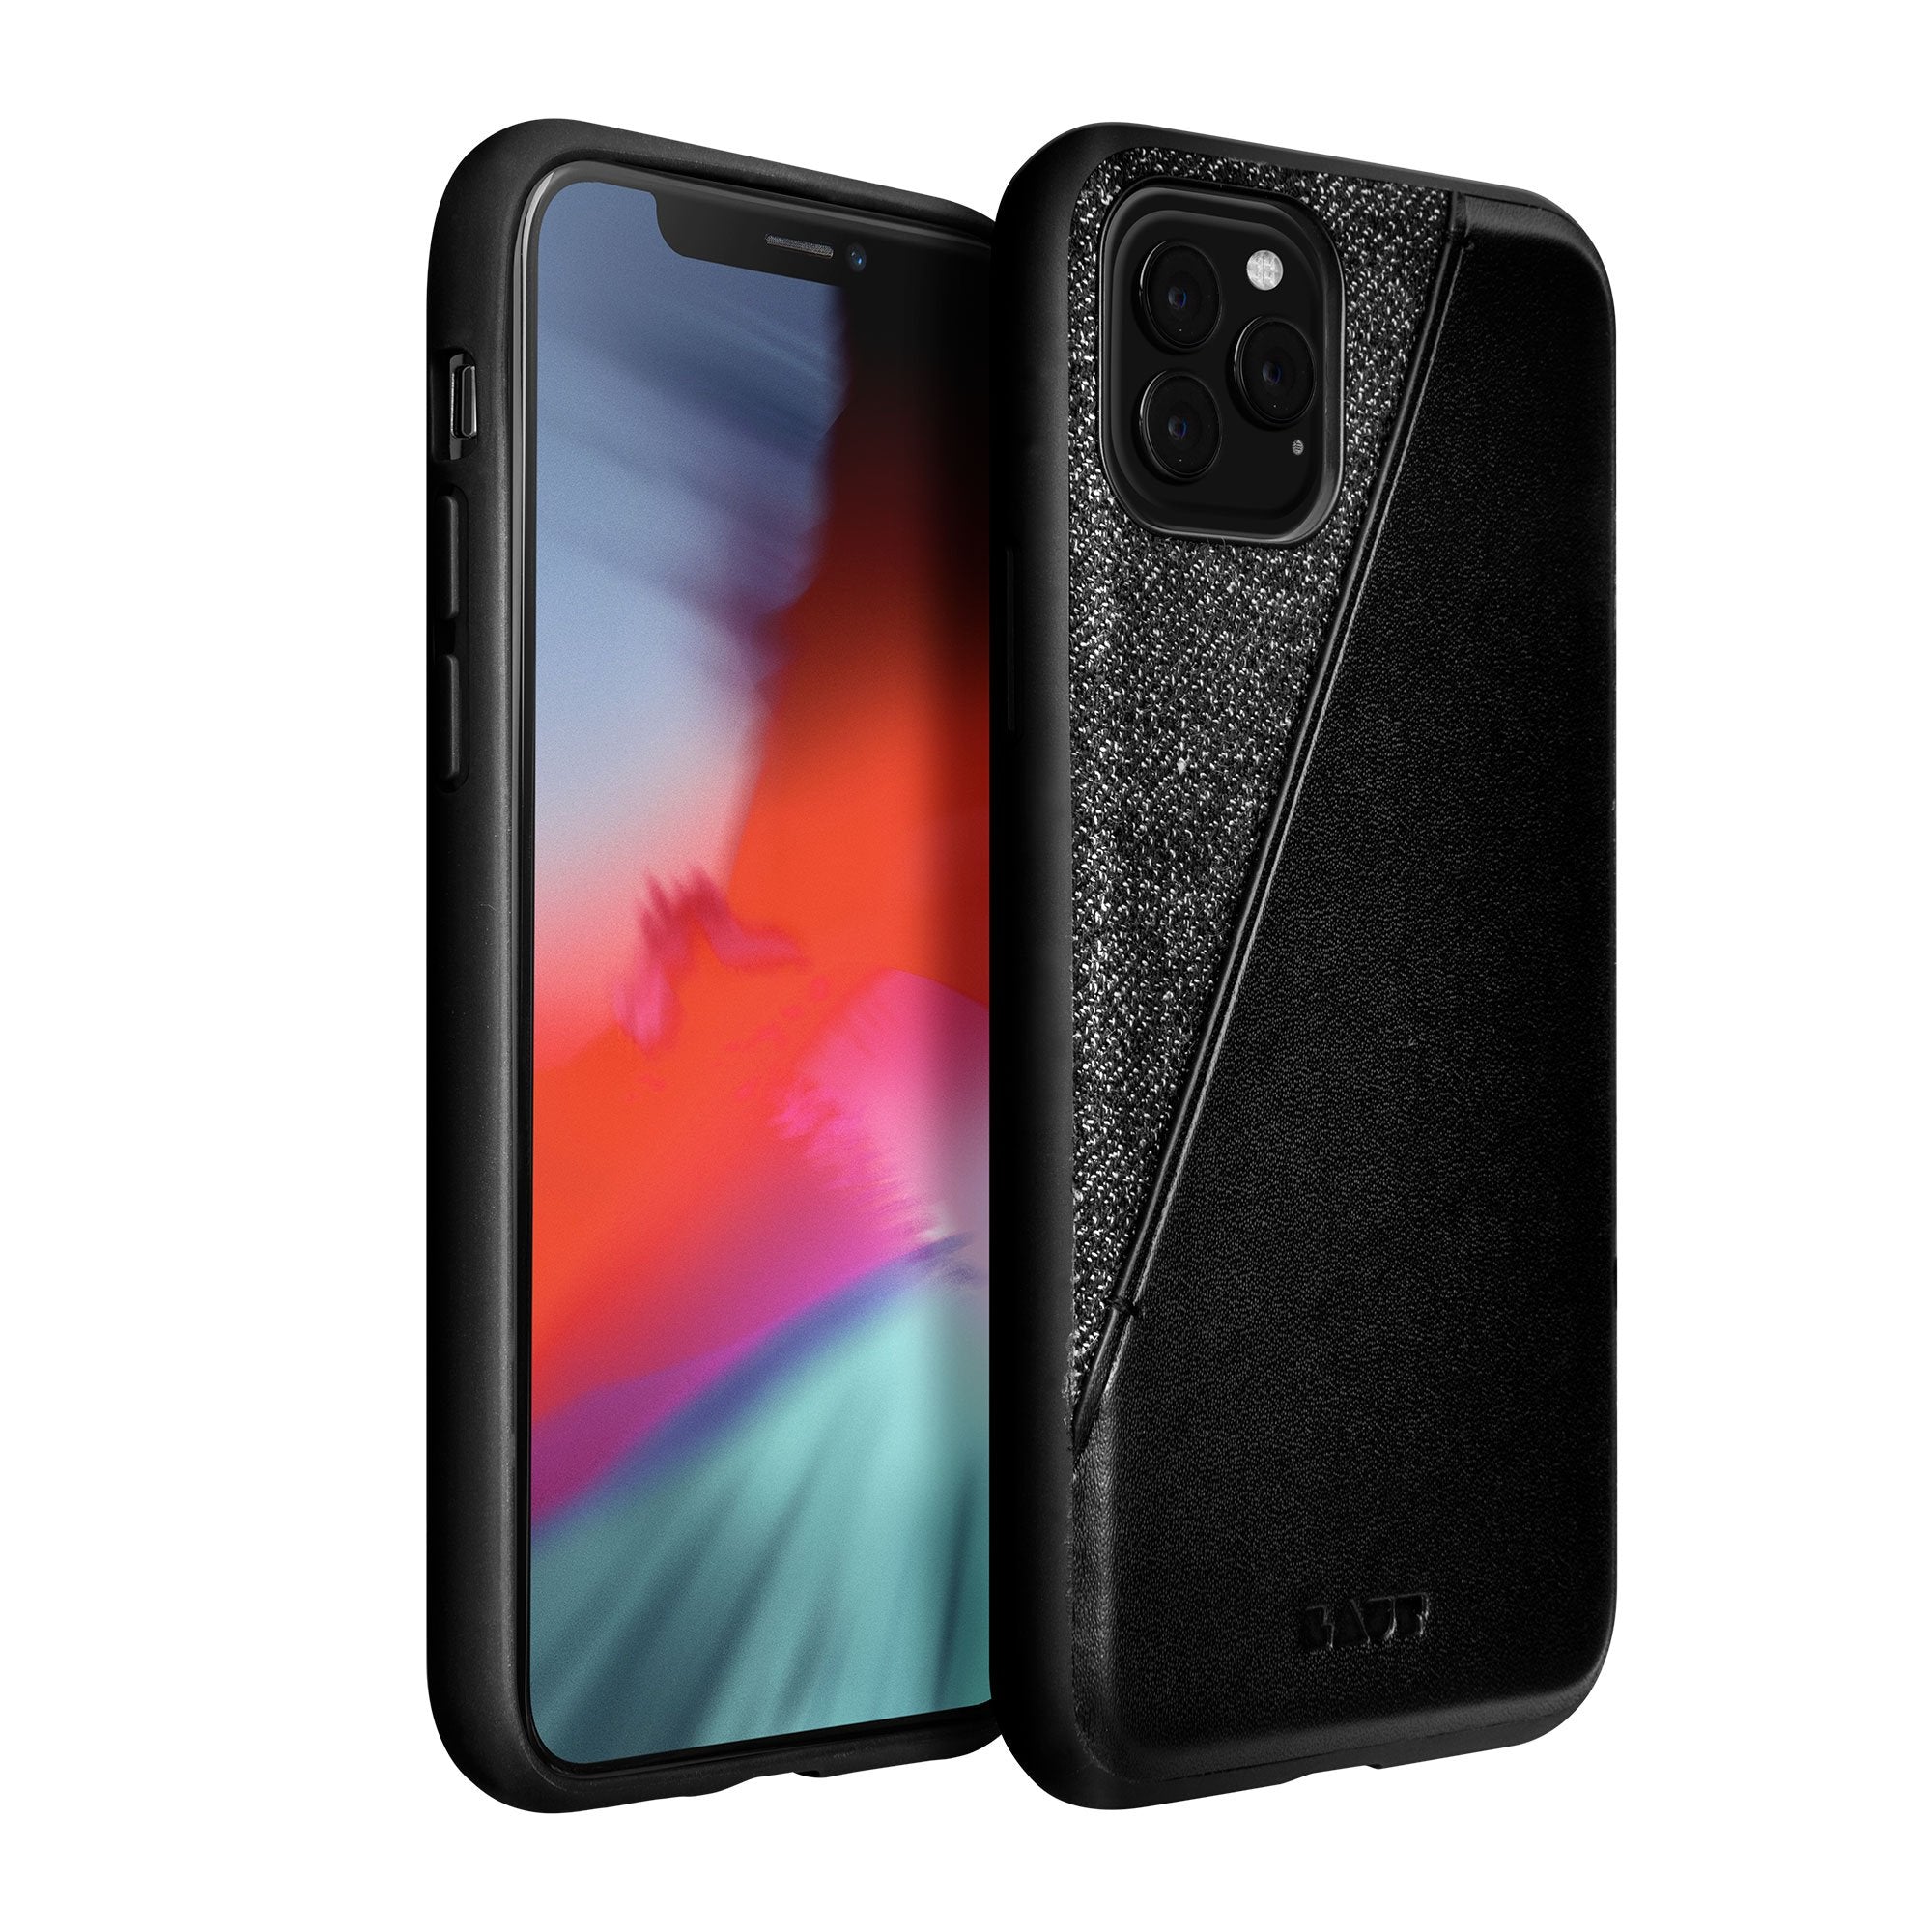 INFLIGHT CARD CASE for iPhone 11 Series - LAUT Japan